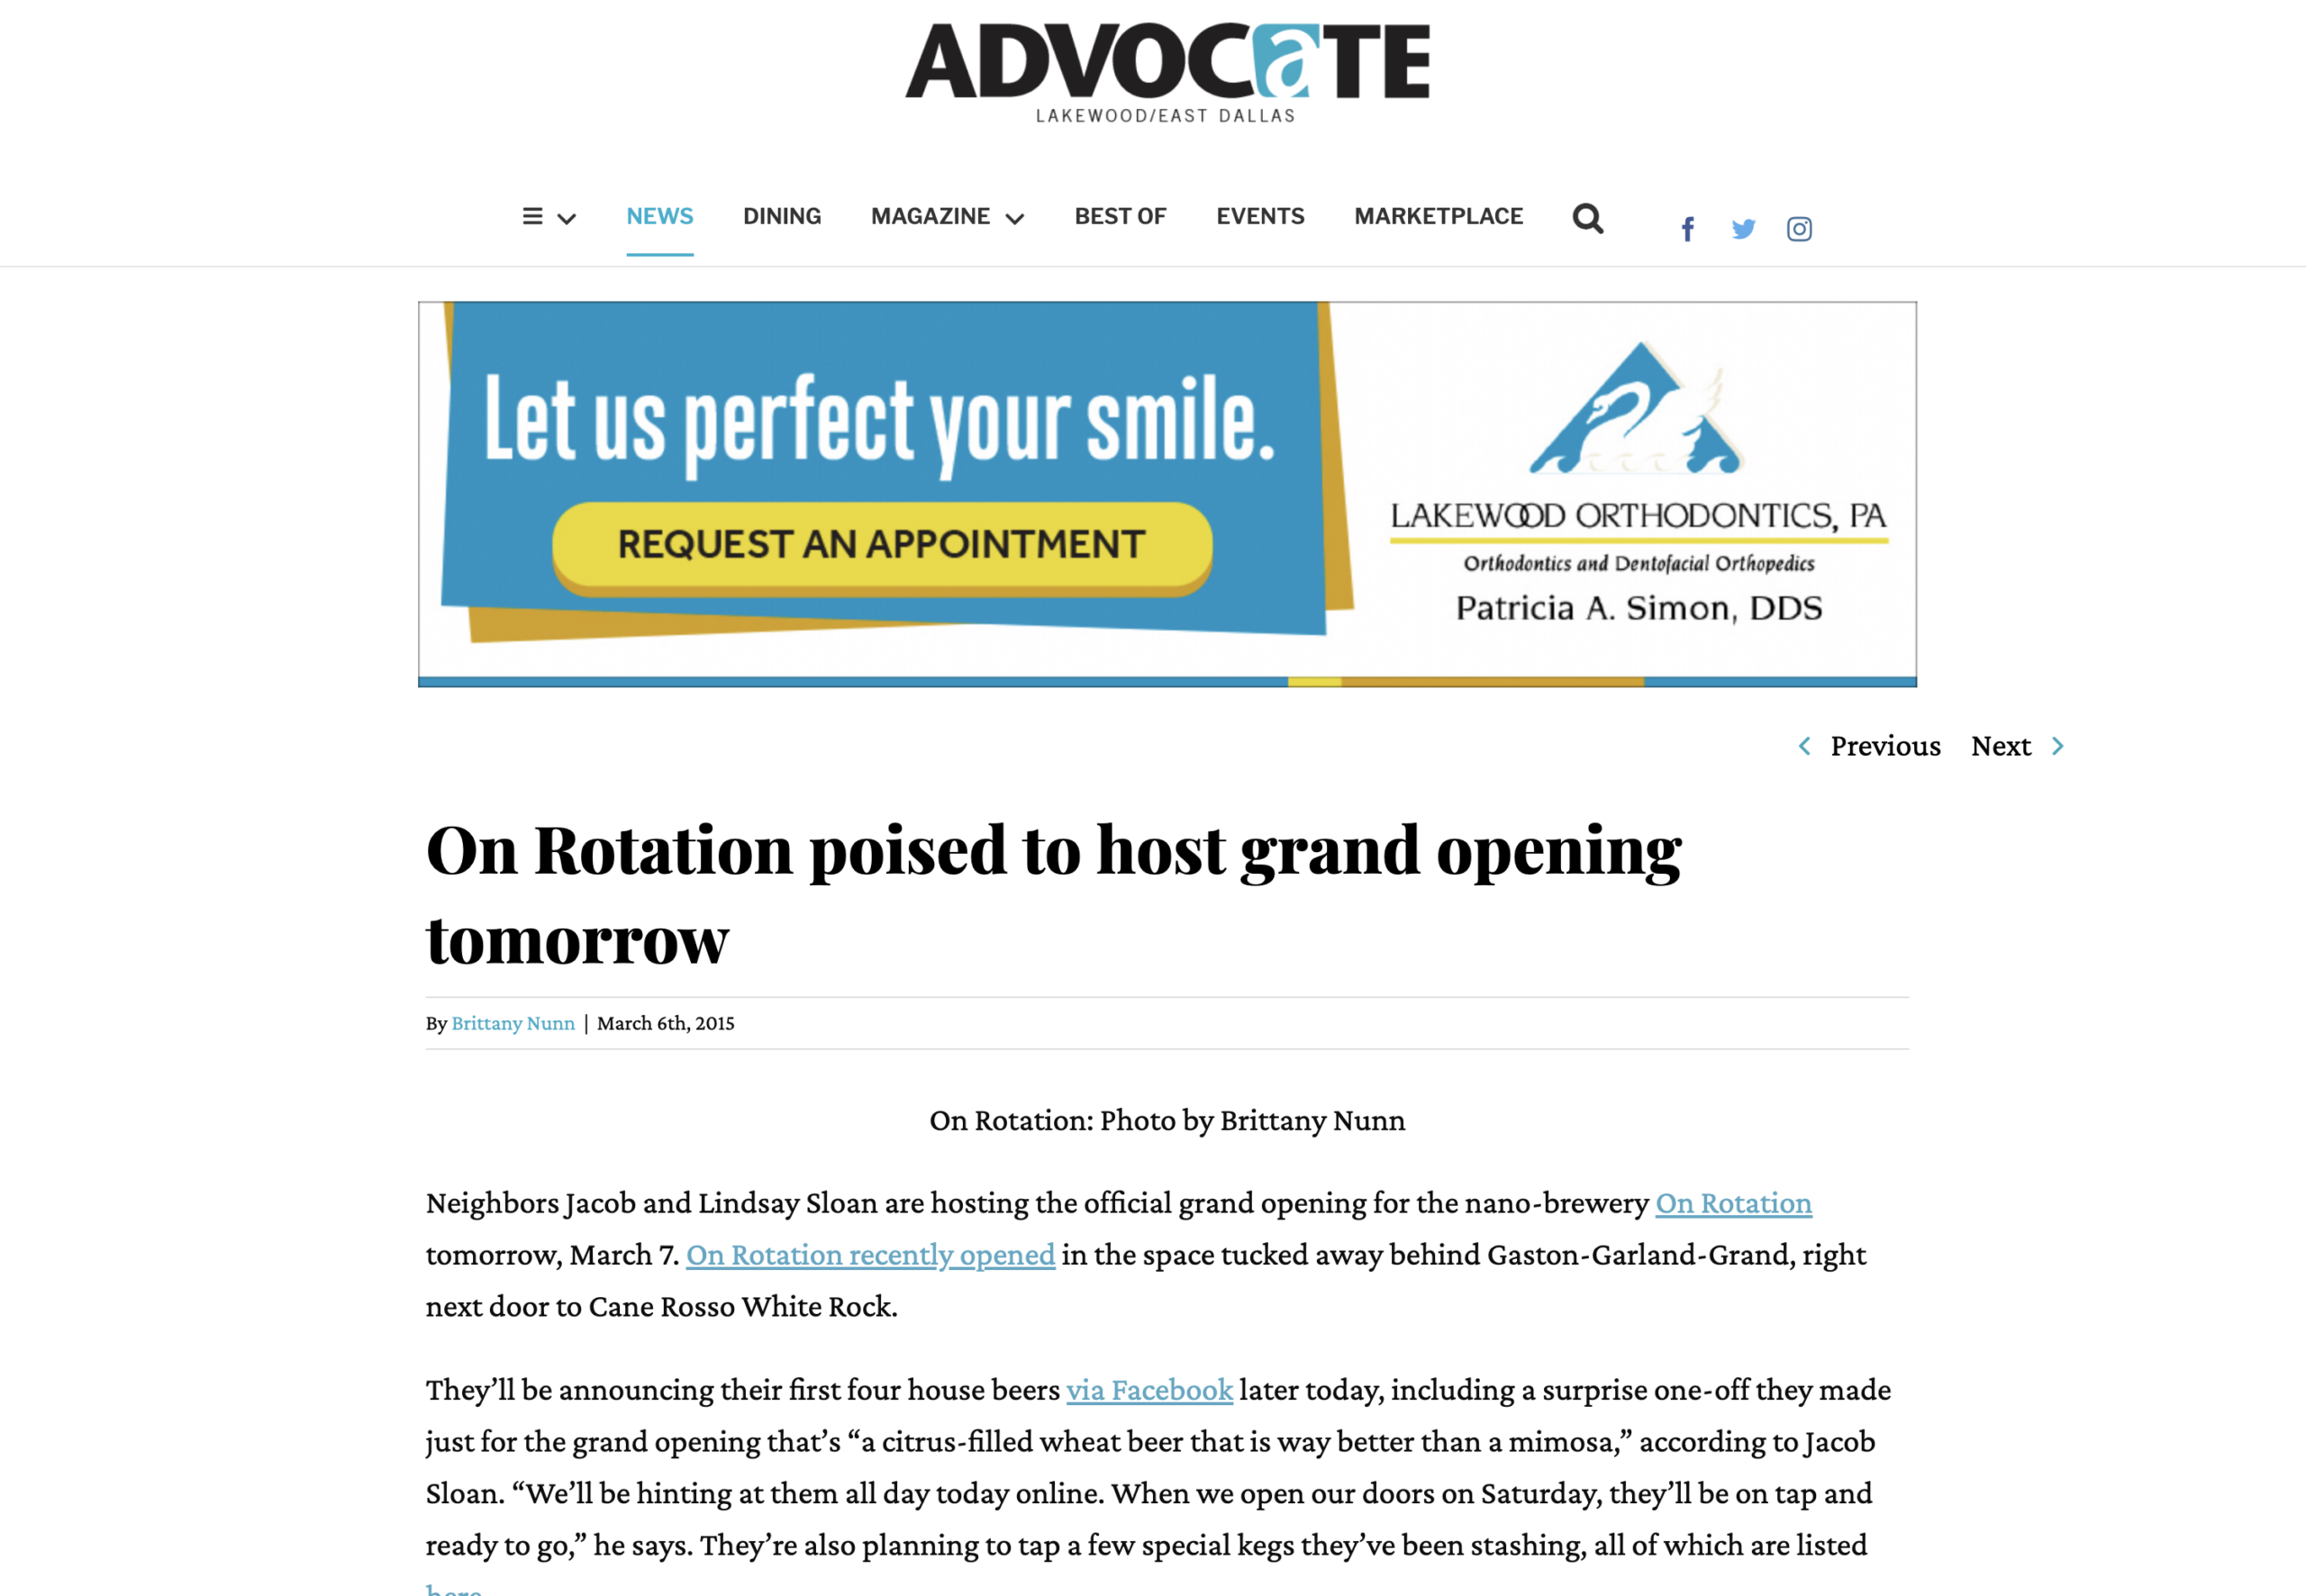 On Rotation poised for grand opening in Lakewood Advocate